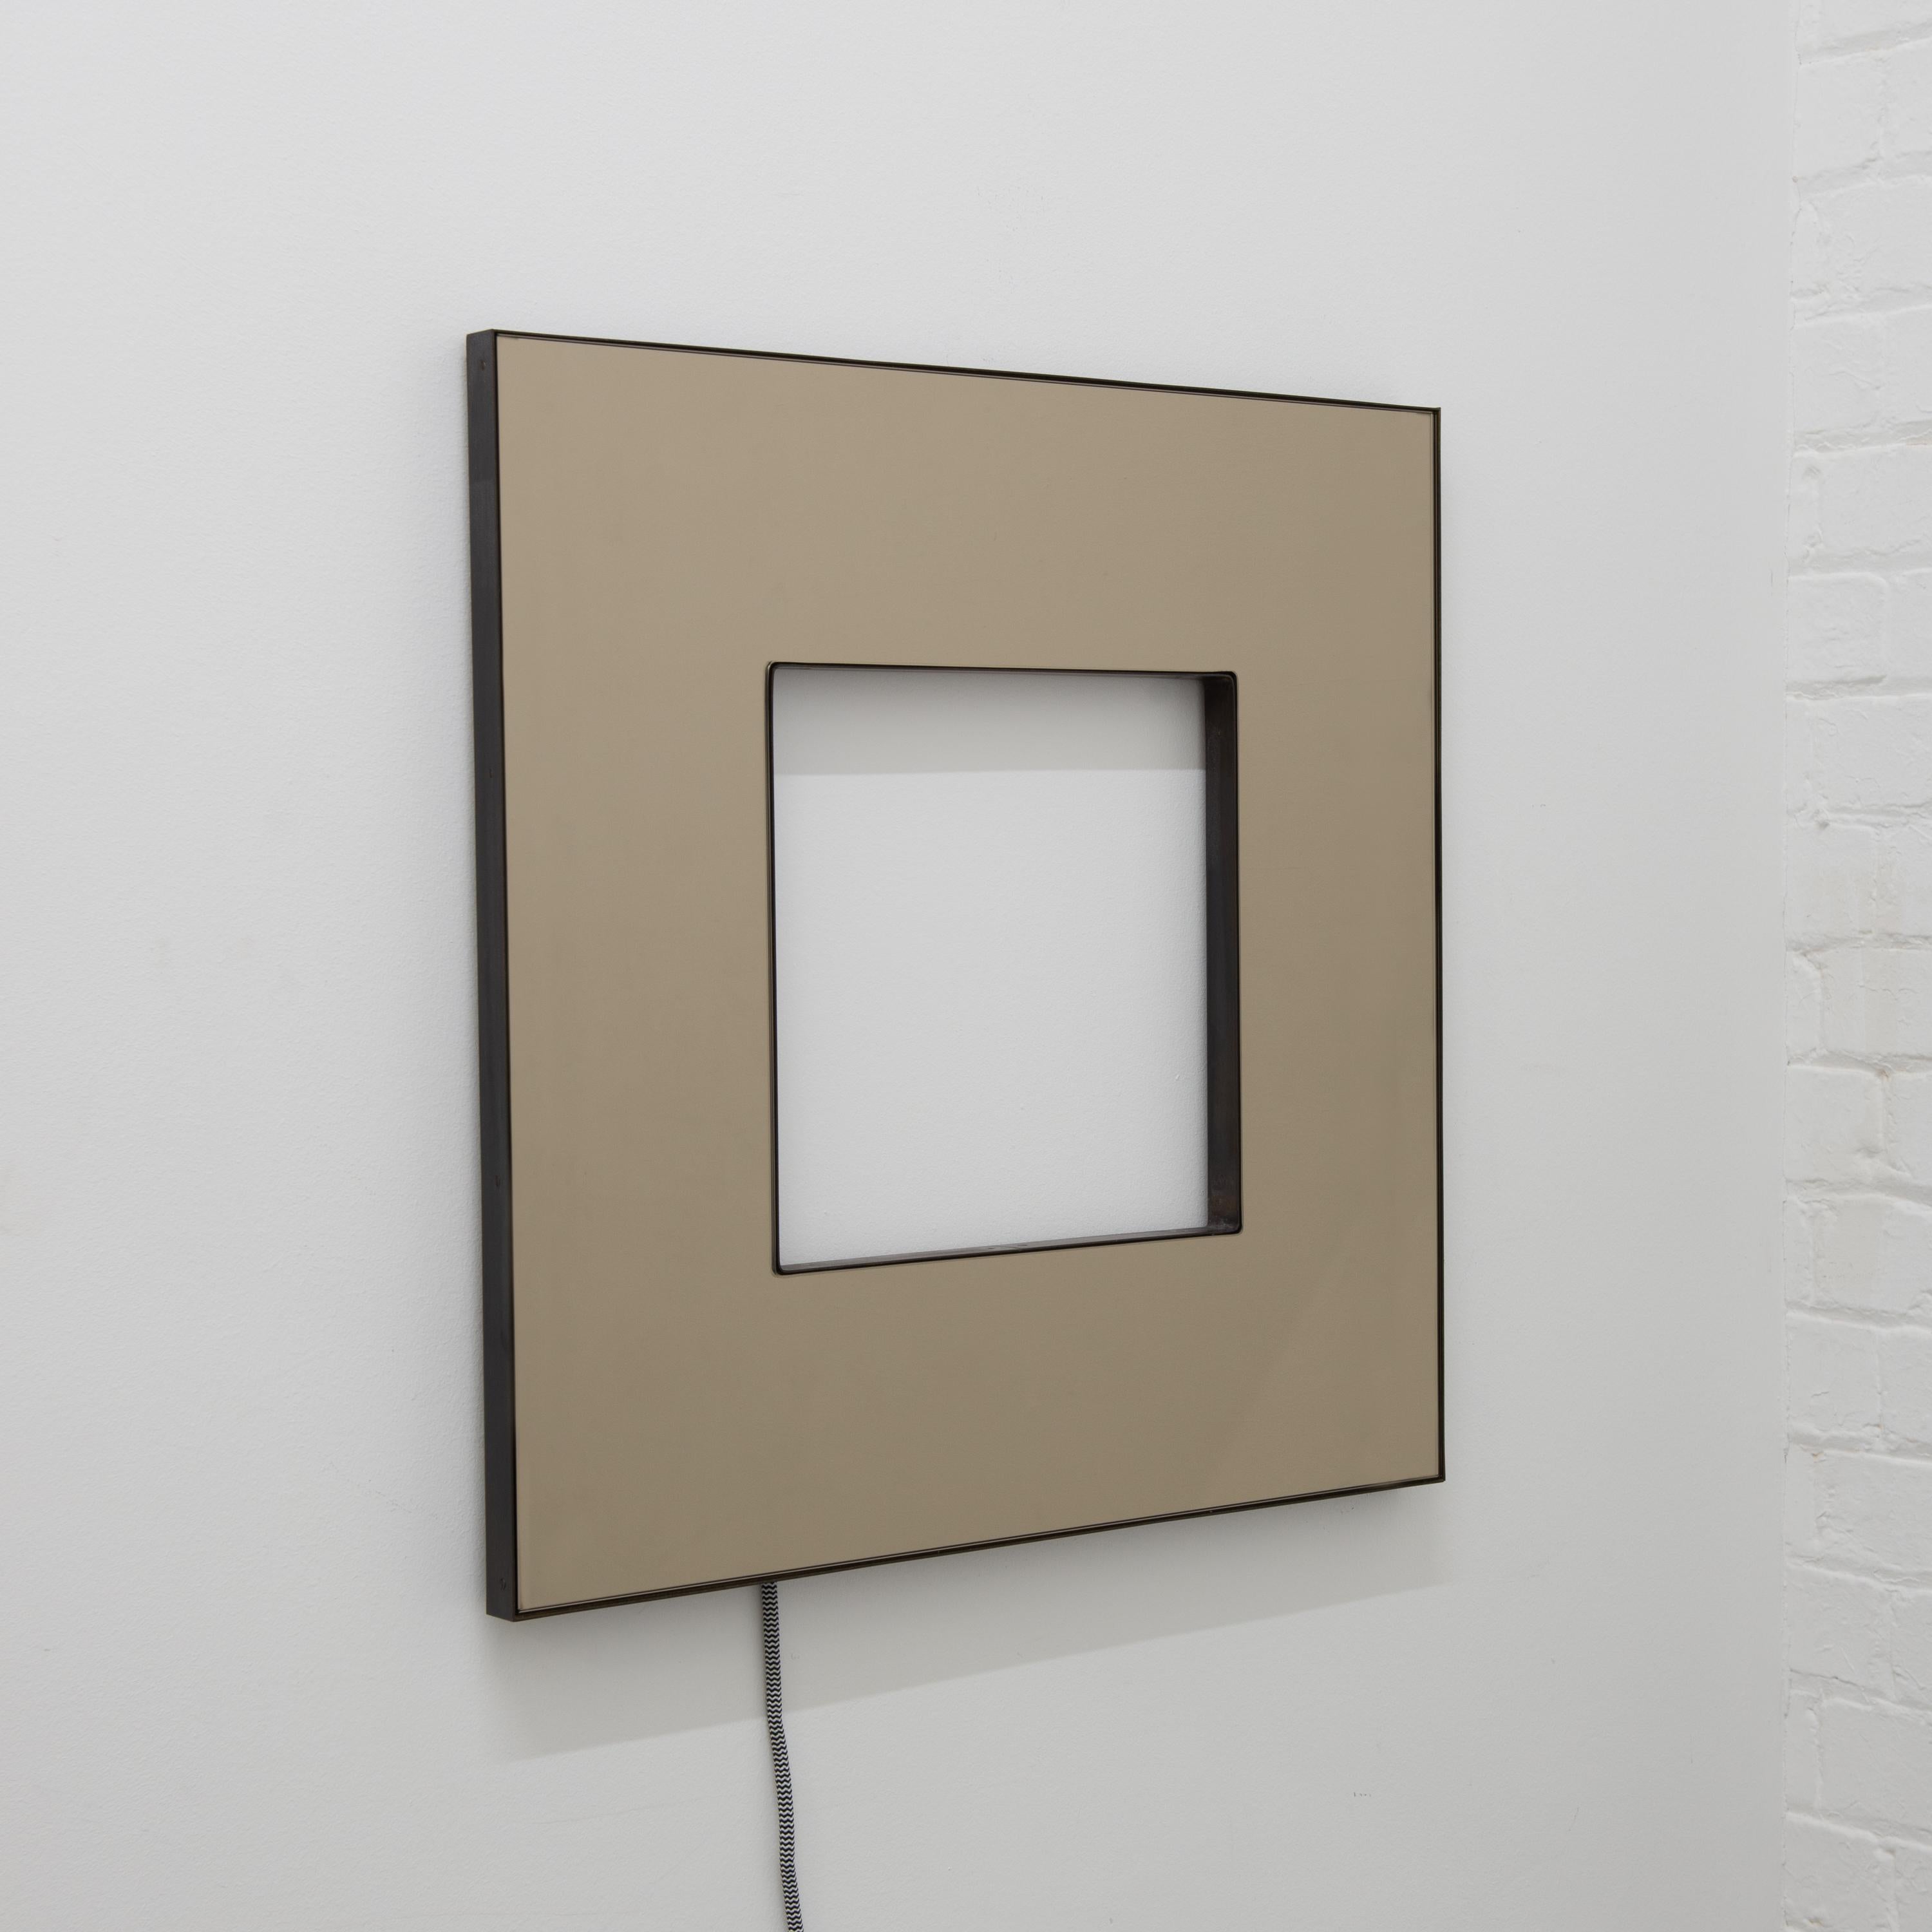 Contemporary Donut™ bronze tinted square mirror with a bronze patina brass frame and back illumination.

The latest creation by mirror designer Jose Luis Alguacil Rodriguez is a very exciting contemporary piece that offers a unique focal point for